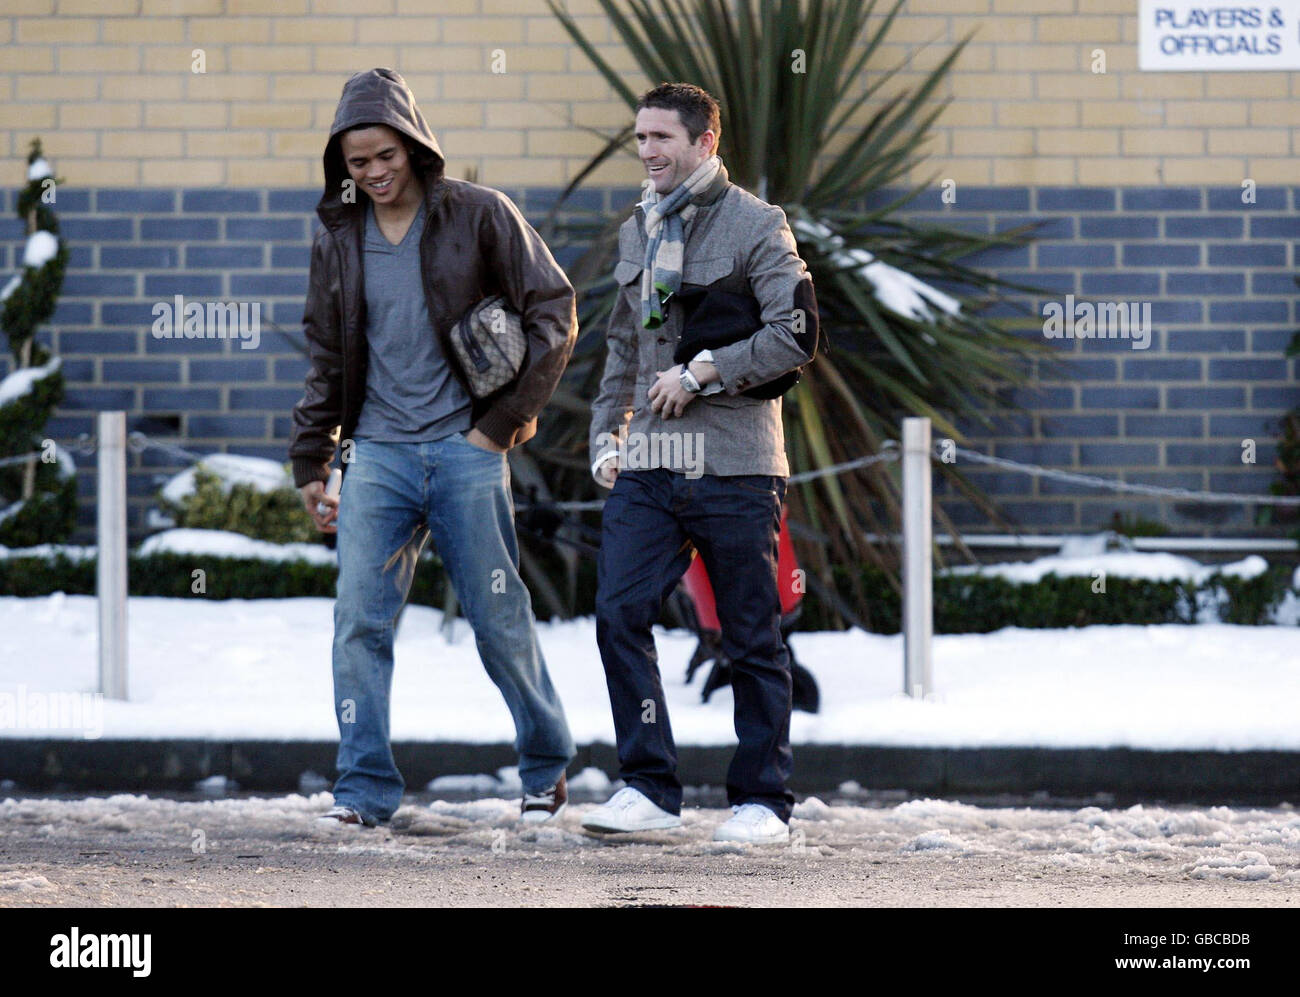 Tottenham Hotspurs Jermaine Jenas (left) and Robbie Keane leaves after a Training Session at The Lodge Training Camp Chigwell, Essex. Stock Photo